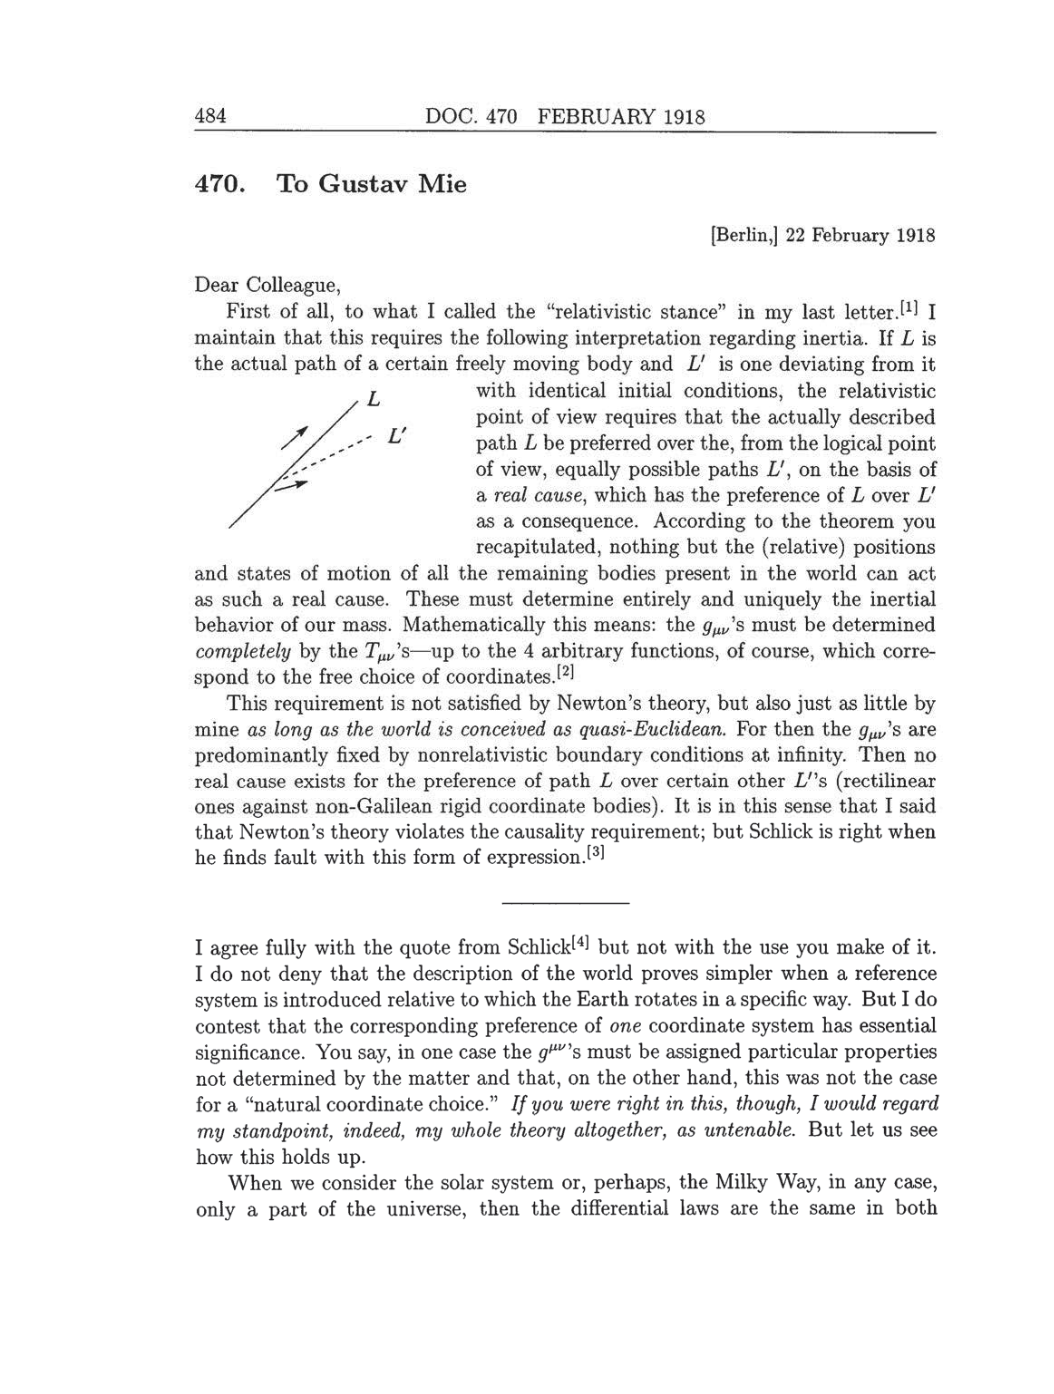 Volume 8: The Berlin Years: Correspondence, 1914-1918 (English translation supplement) page 484